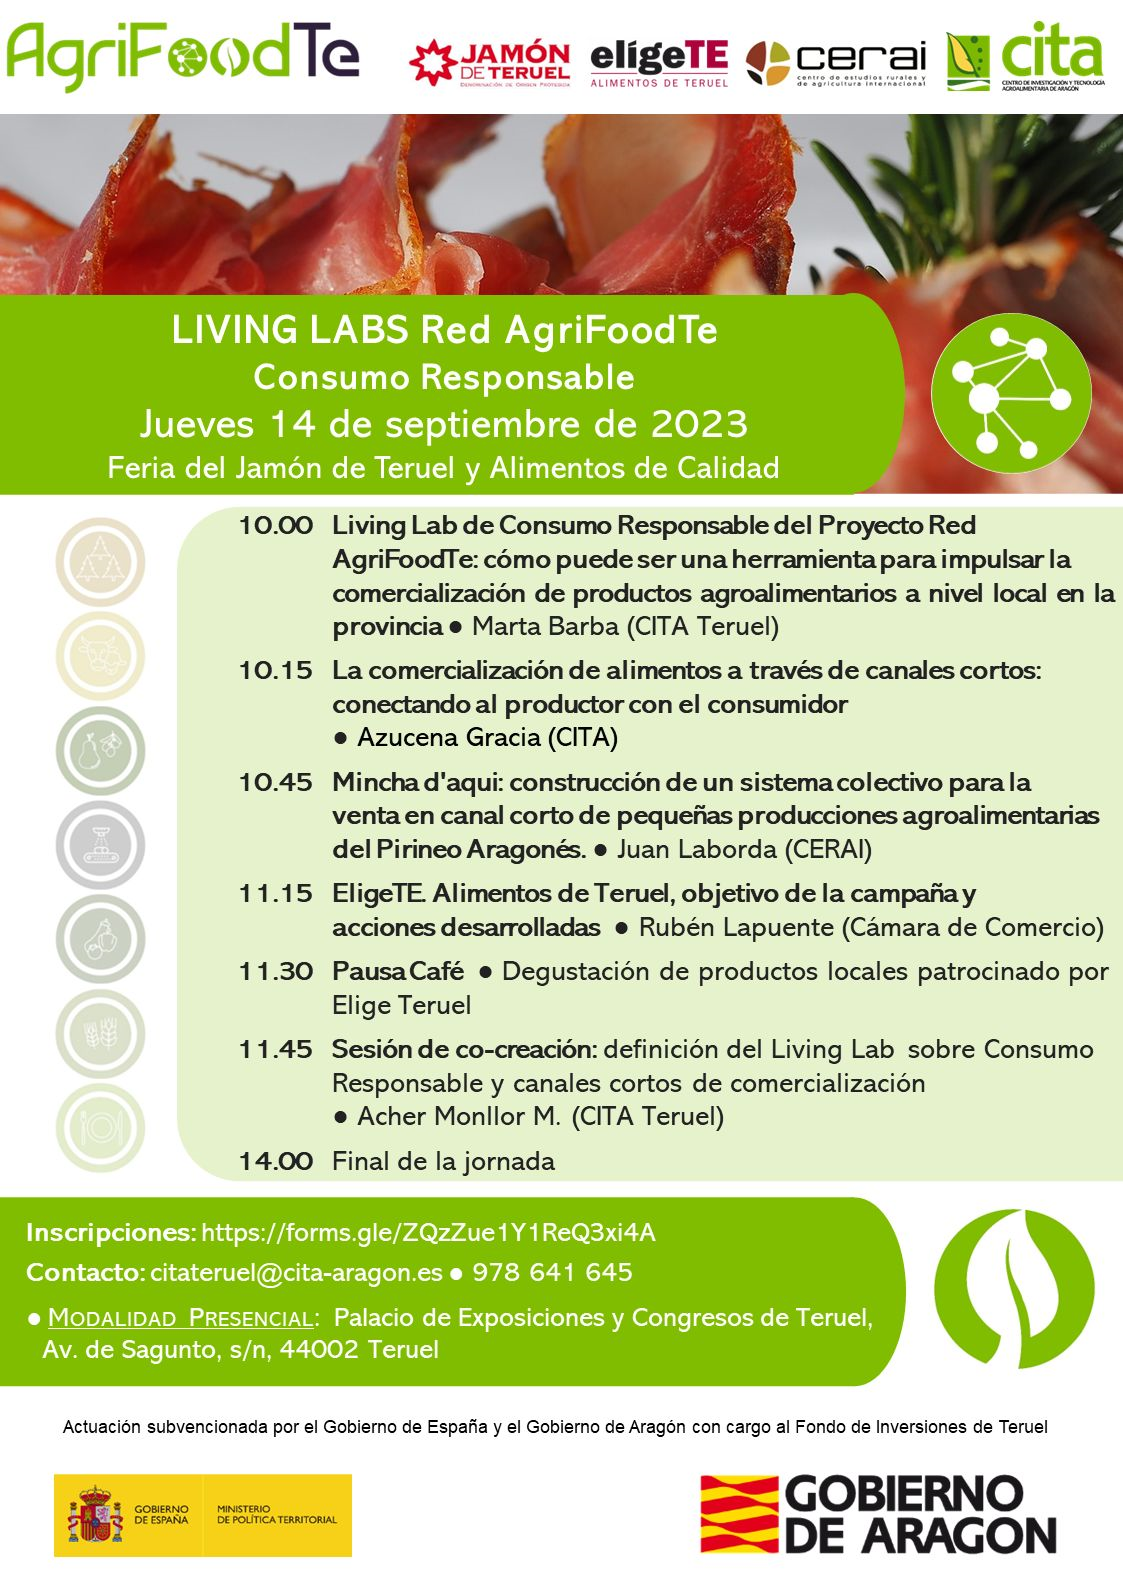 AgriFoodTe Living Lab